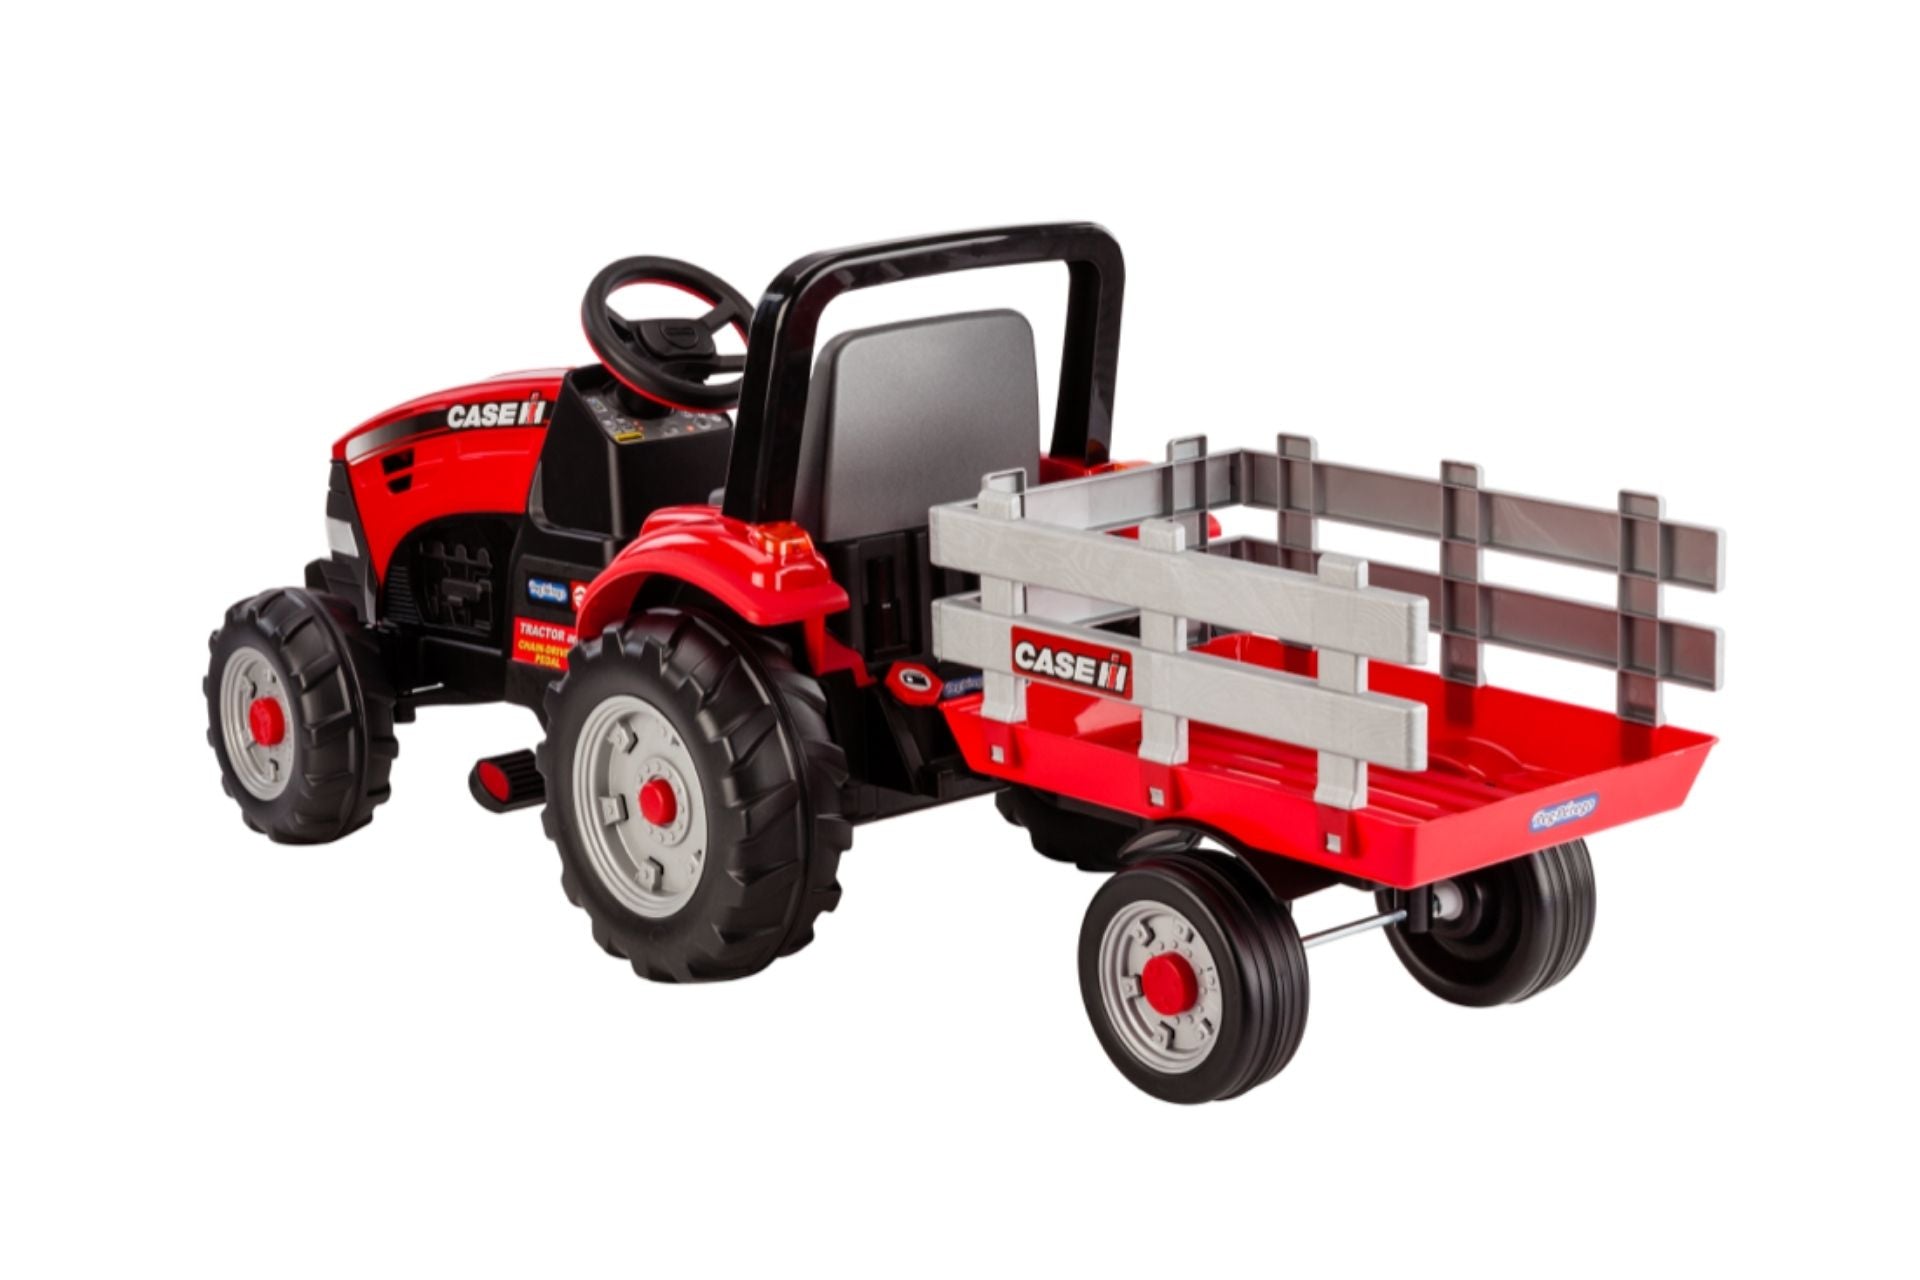 Case IH Lil Tractor And Trailer 6-Volt Ride On Vehicle